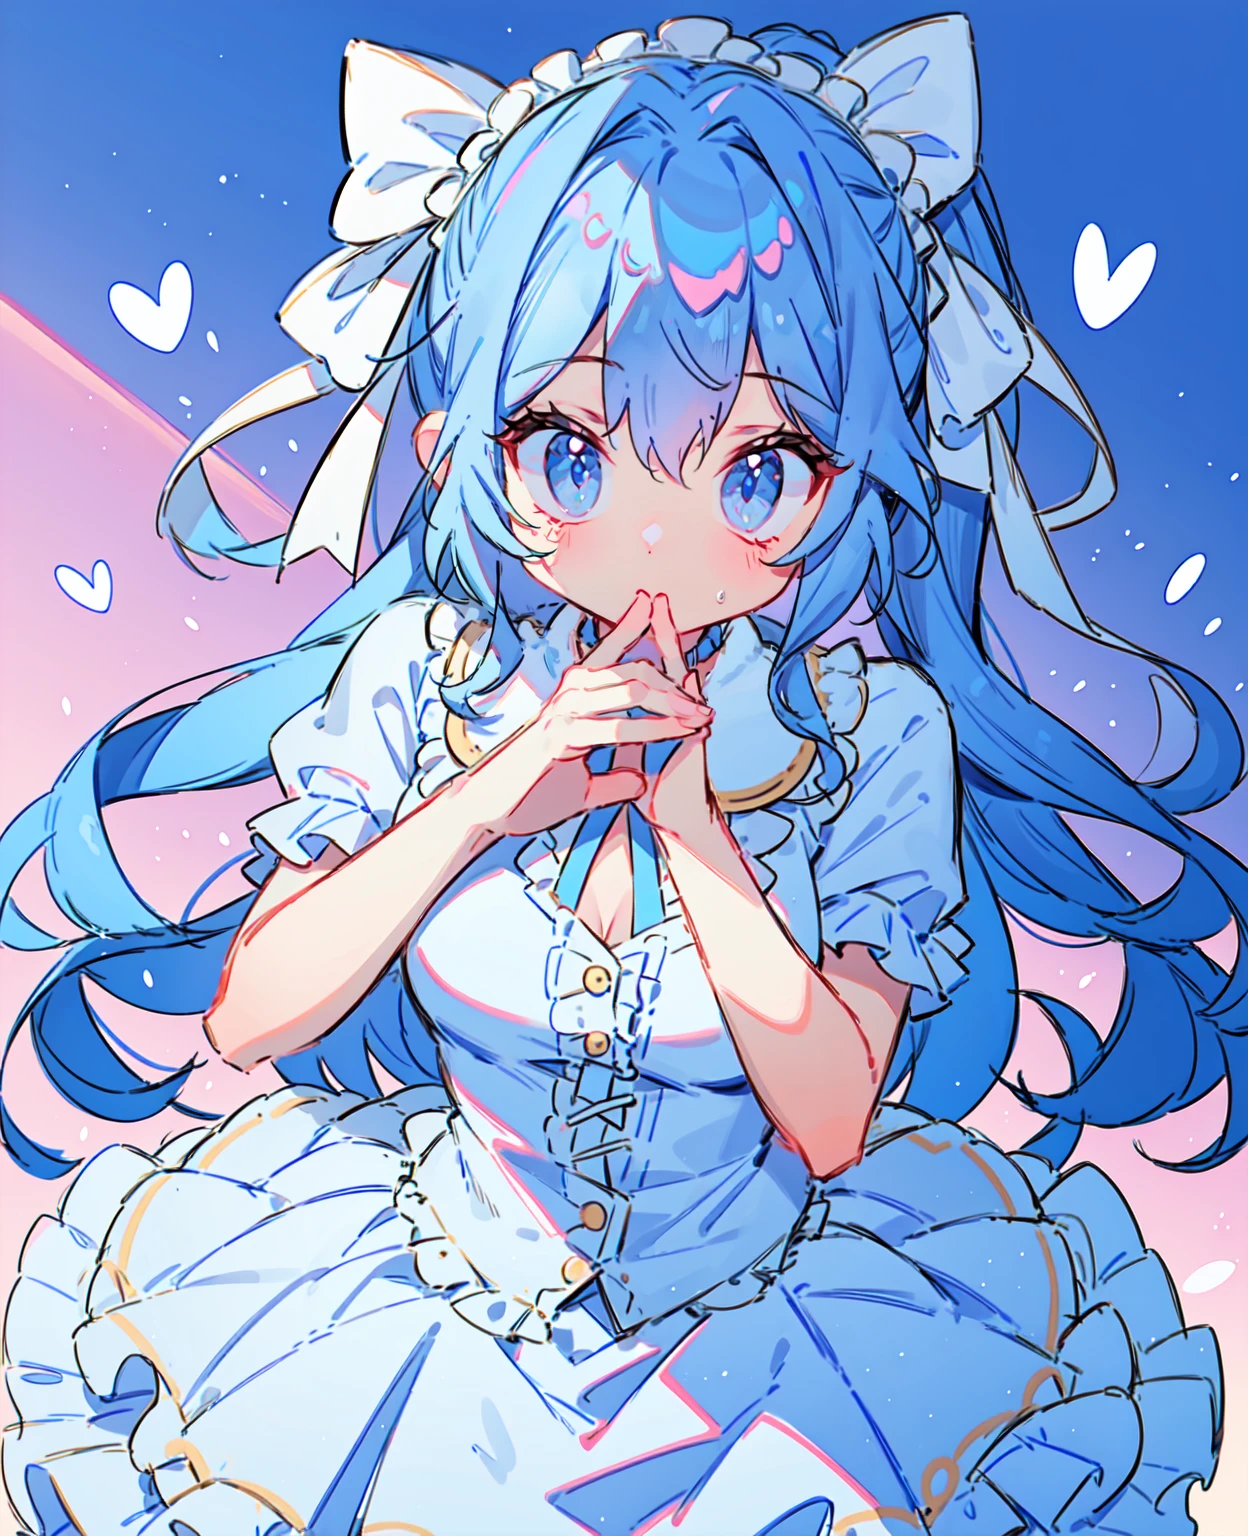 1 girl in, blue hair, Long double ponytail, blue shirt, puffy collar, White fluffy skirt,  heart and your hands, White ribbon on hair, Lots of hair accessories, Lolita prostitute